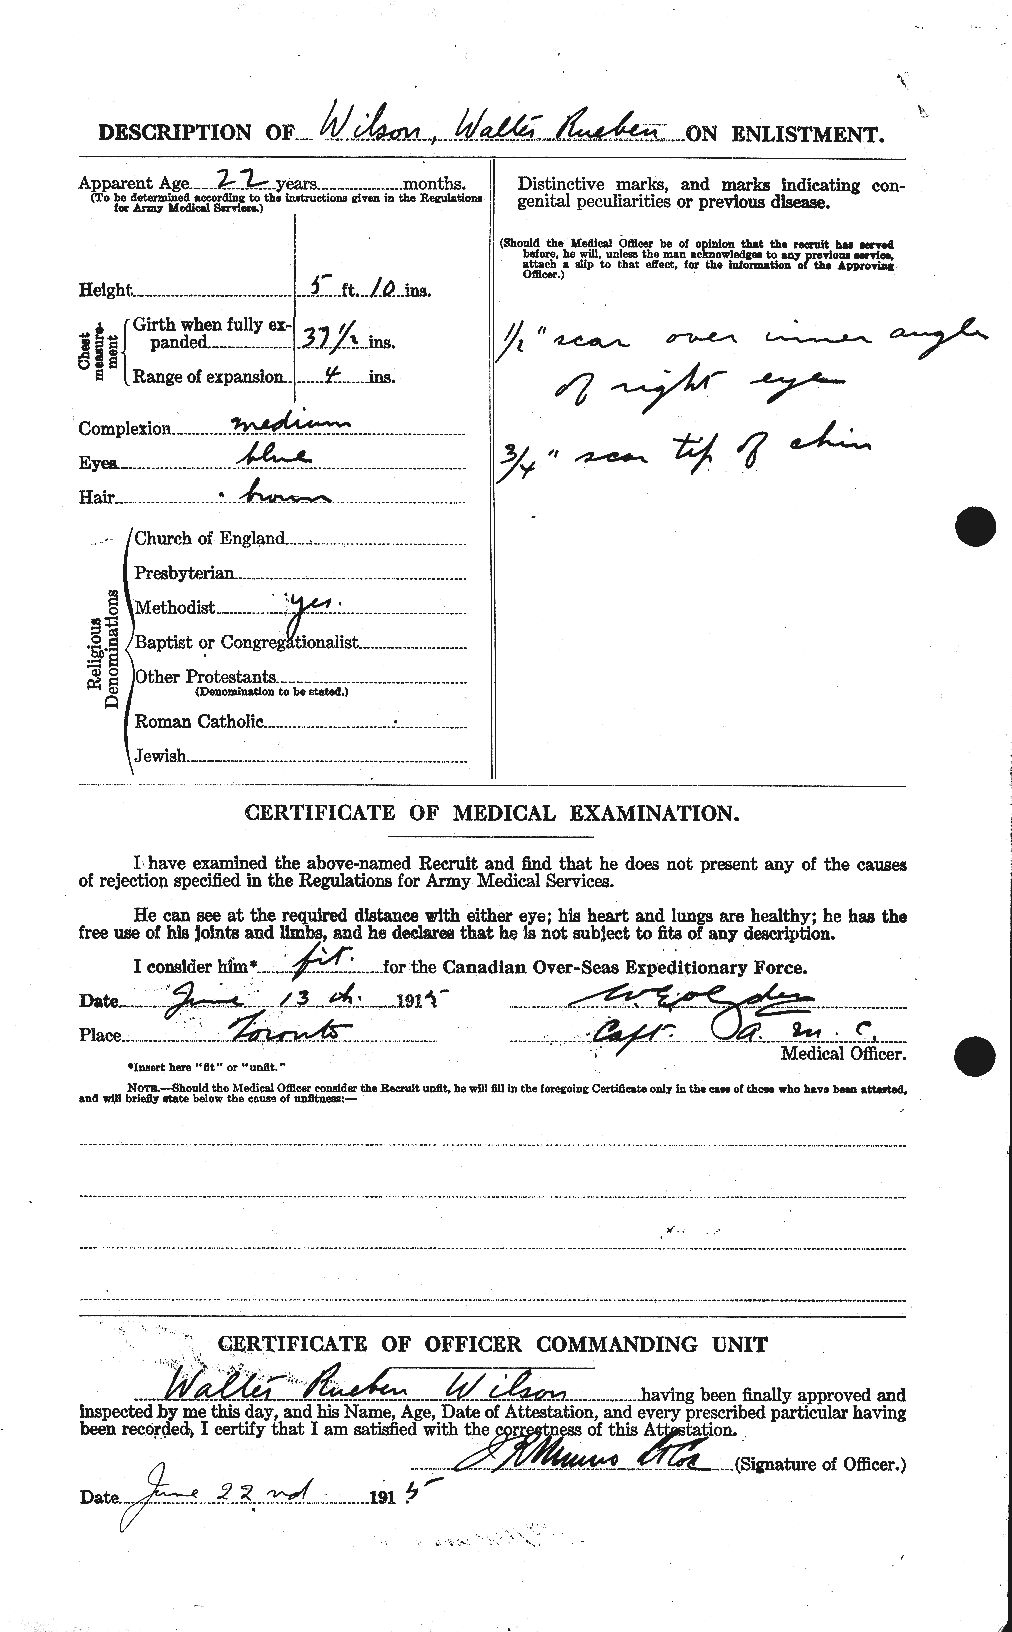 Personnel Records of the First World War - CEF 681762b